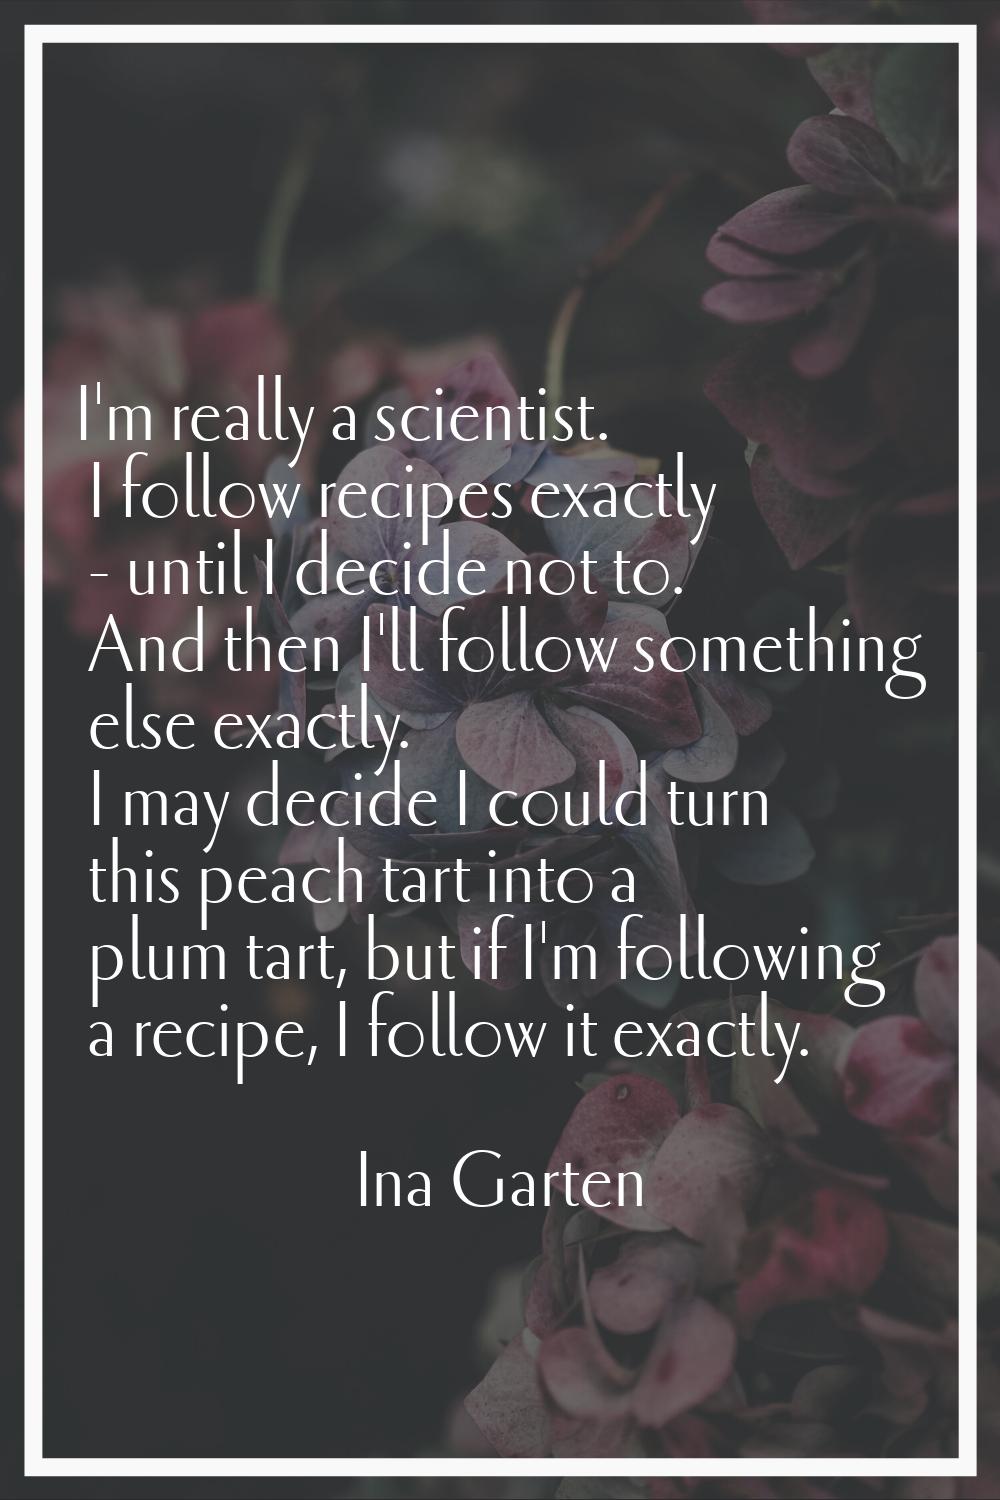 I'm really a scientist. I follow recipes exactly - until I decide not to. And then I'll follow some